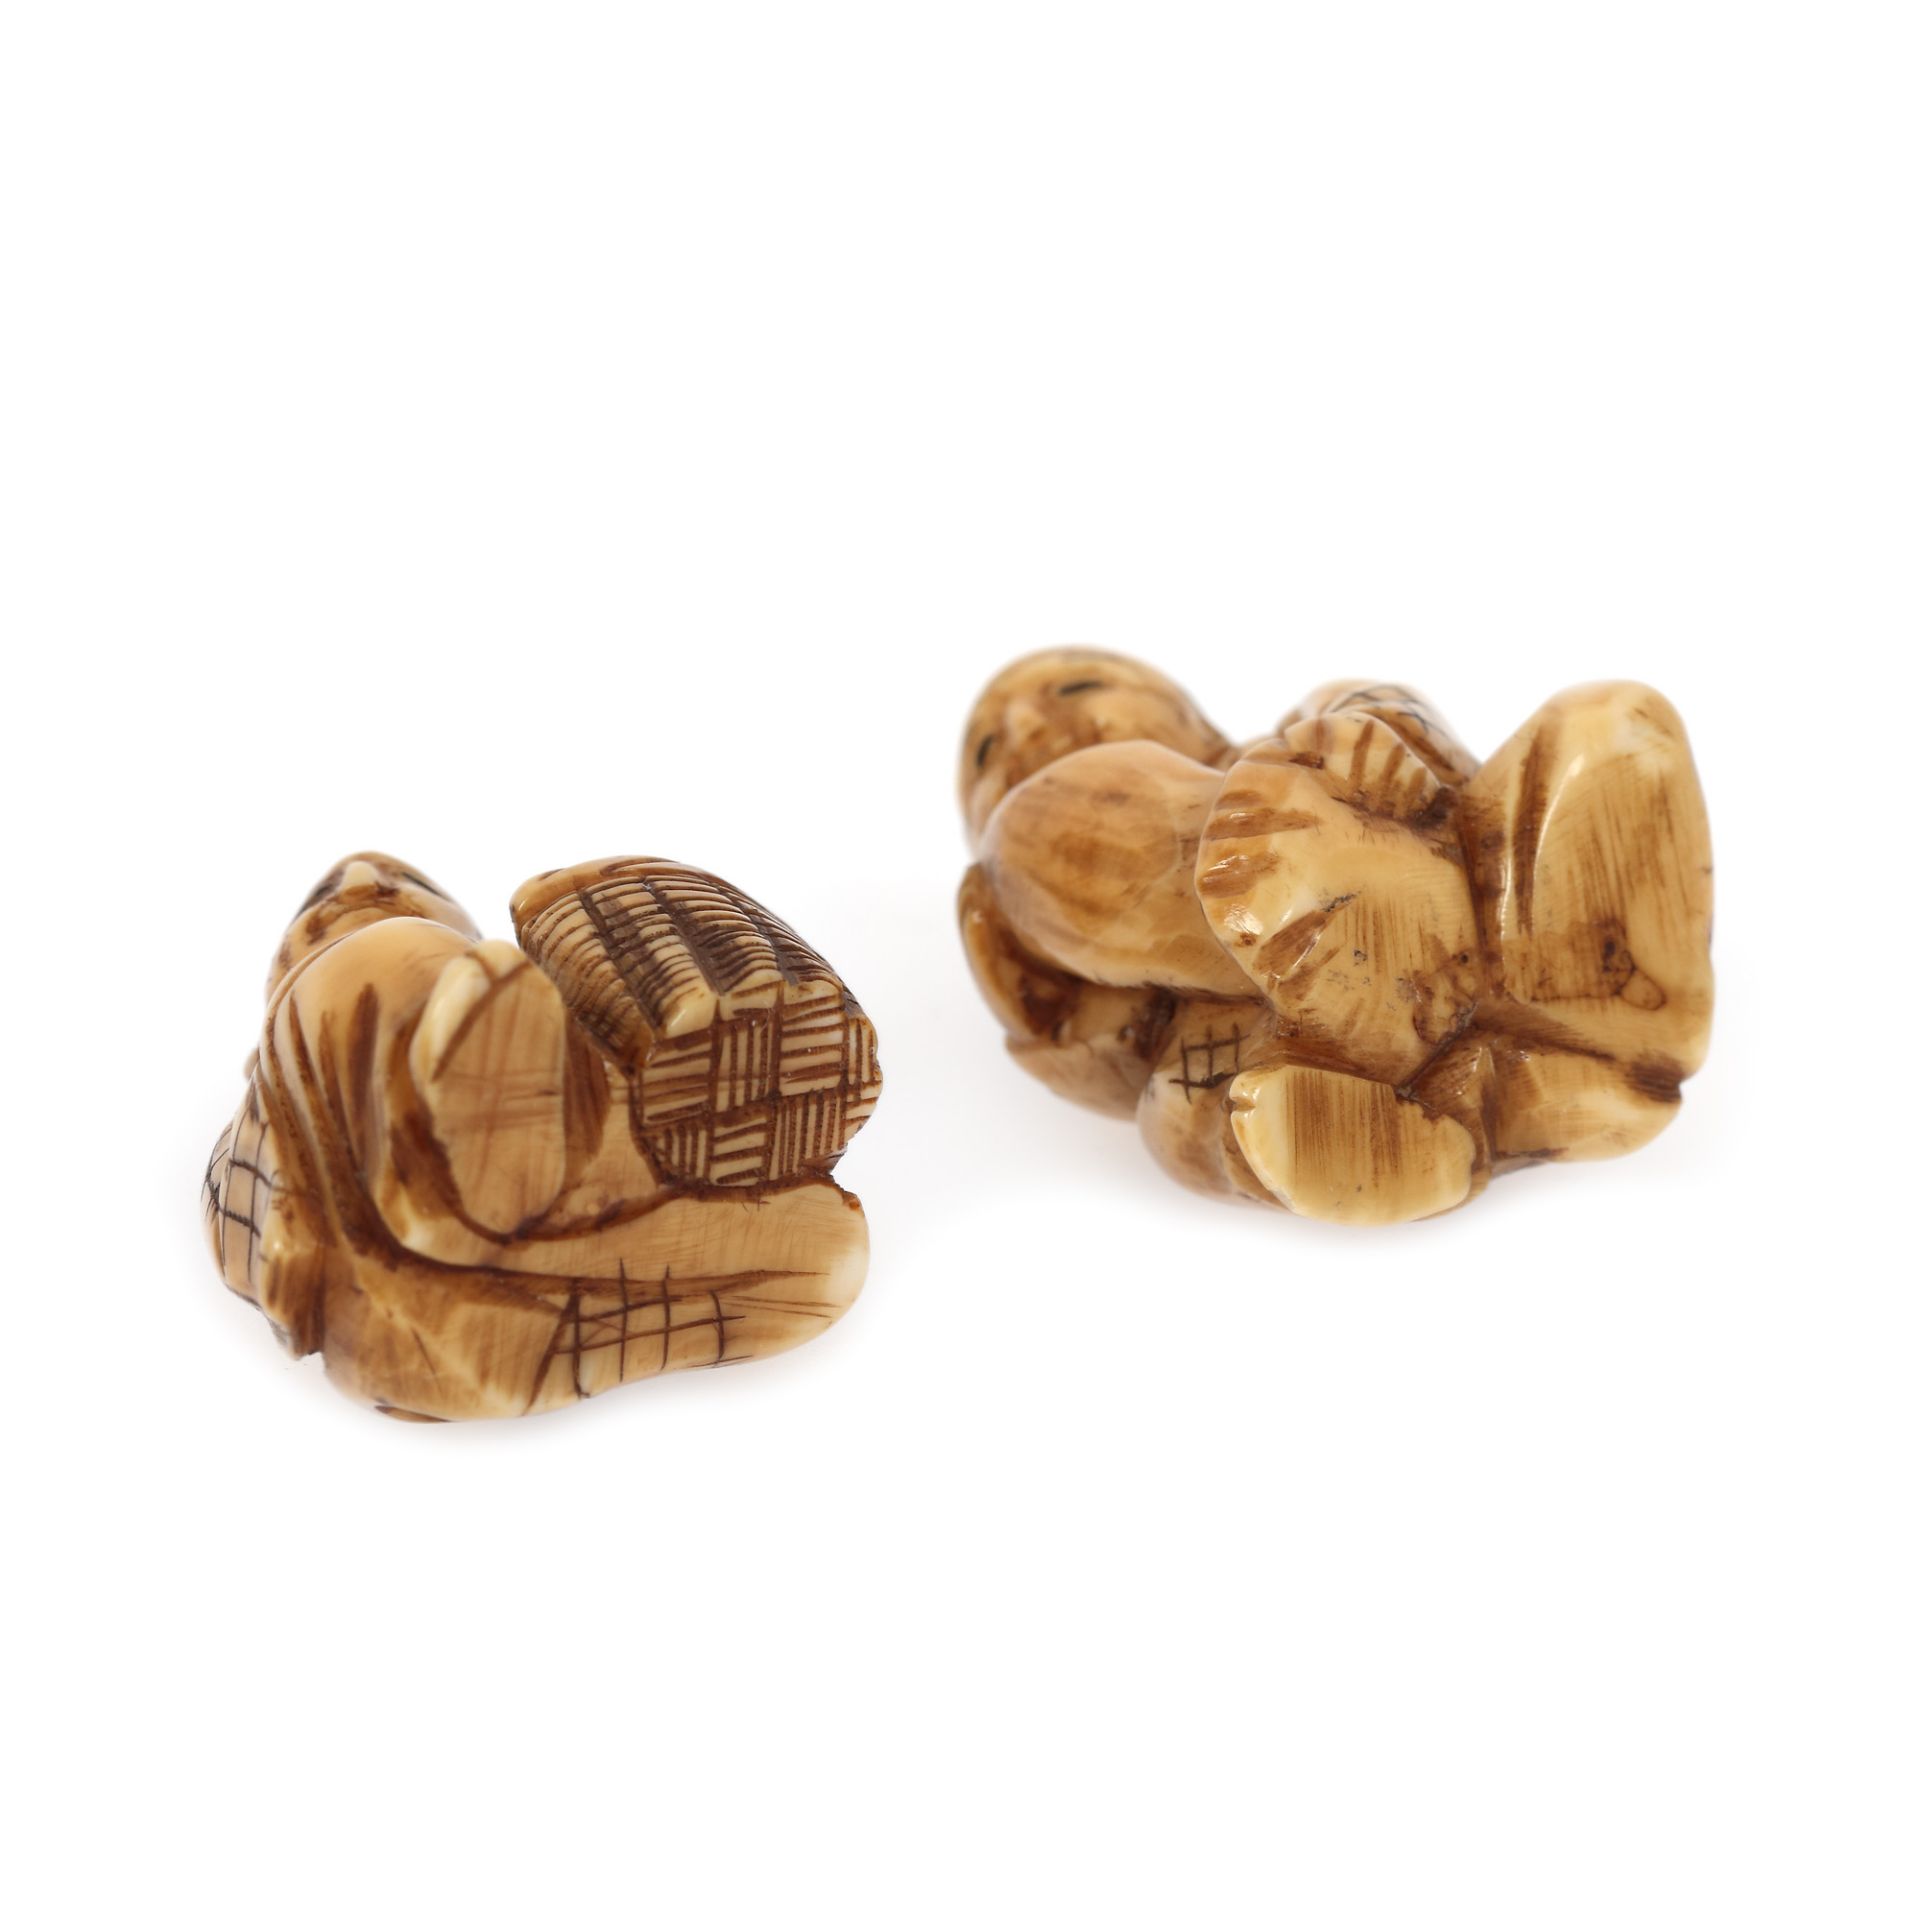 Pair of ivory netsuke, depicting two tormented men, Japan, late 19th century - Image 3 of 4